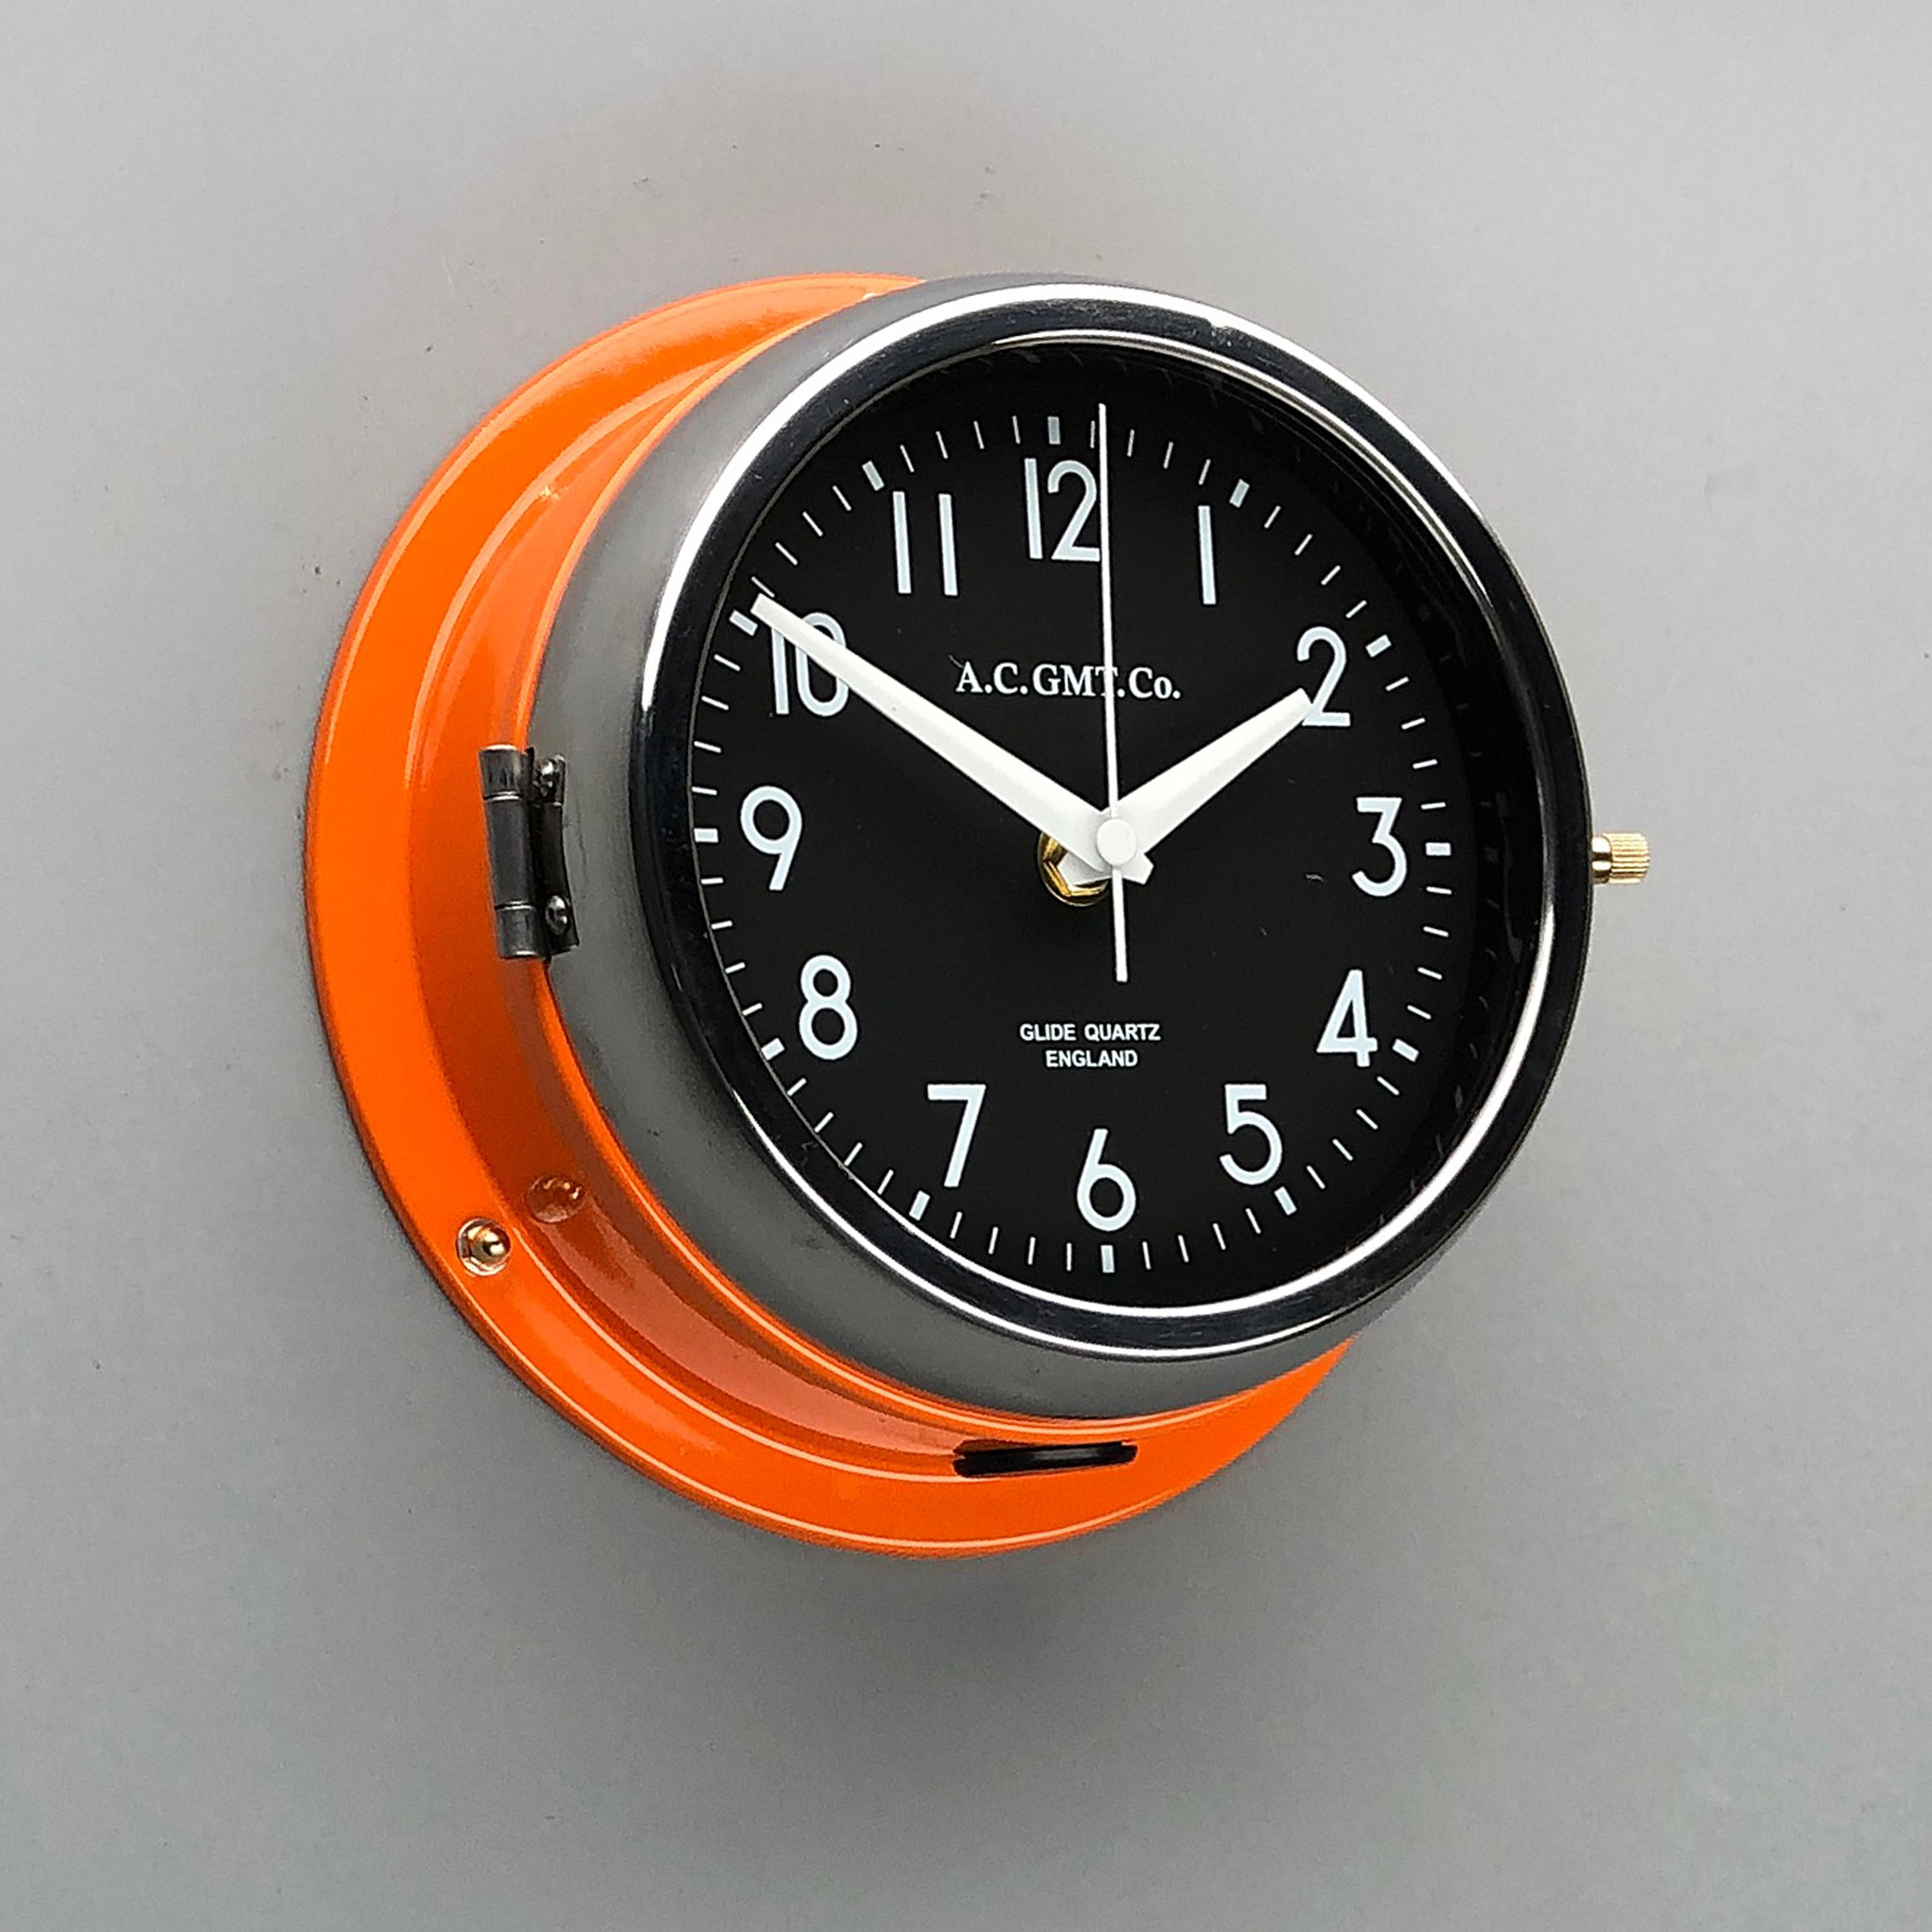 Rescued from Industrial scrap yards and brought back to life in our UK workshop, our expert process allows us to create a high quality clock of luxury standards. 
At A.C GMT Co. we apply new paint finishes or lustrous copper and bronze to the clock